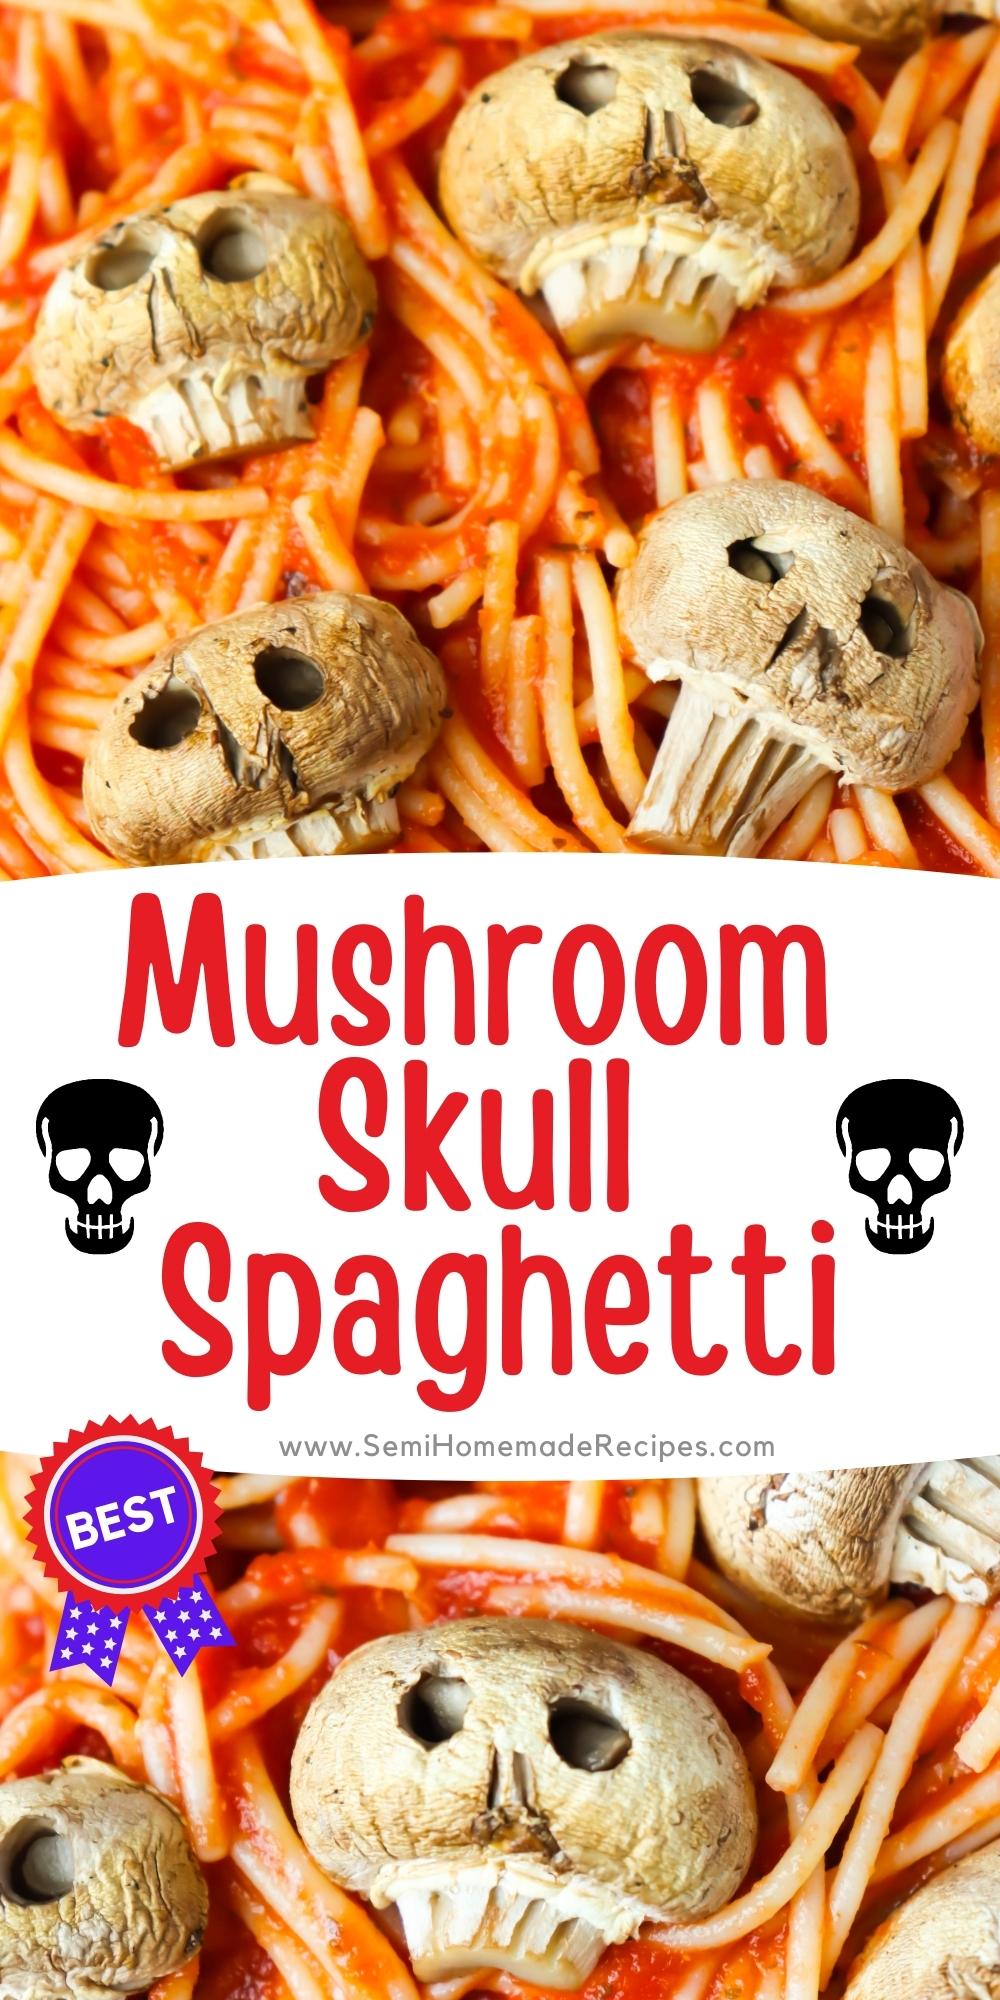 Mushroom Skull Spaghetti  - White Mushrooms are easily carved and baked to look like tiny skulls then served with spaghetti for a creep, spooky Halloween dinner. 